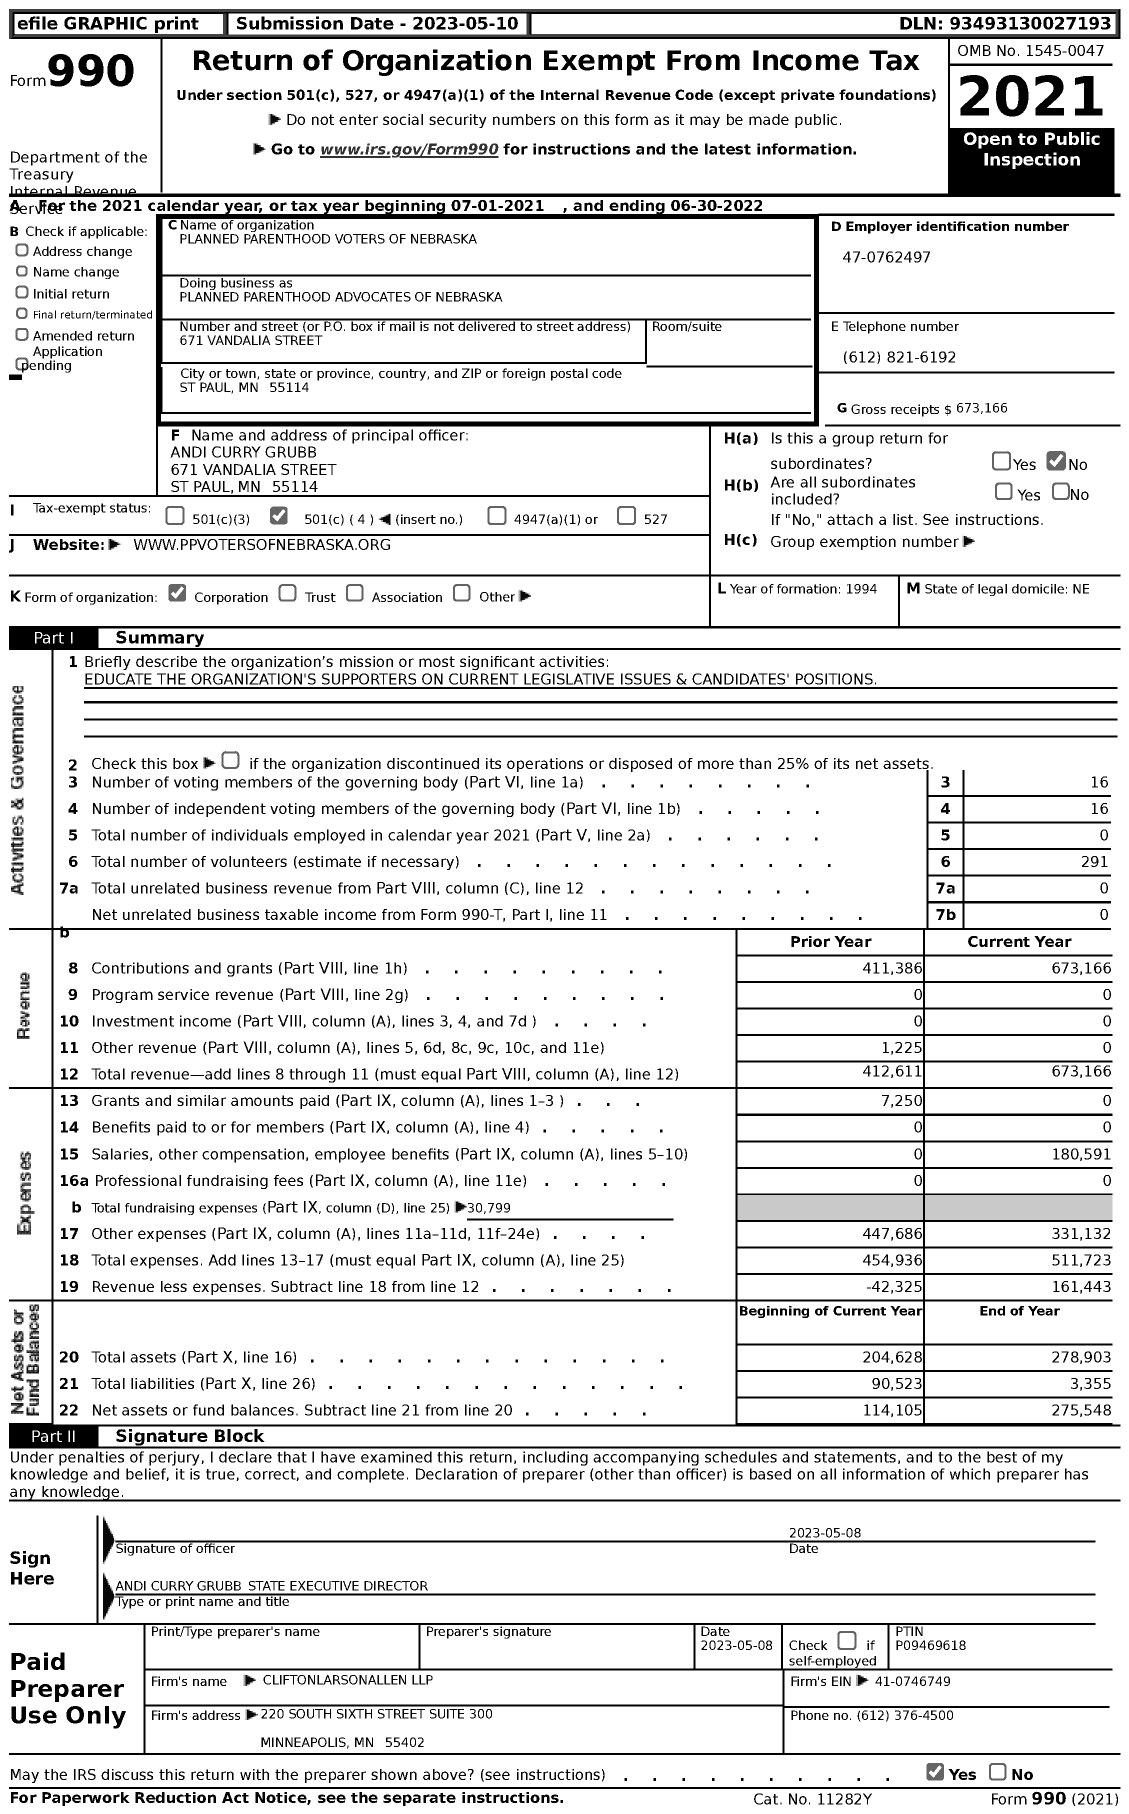 Image of first page of 2021 Form 990 for Planned Parenthood Advocates of Nebraska